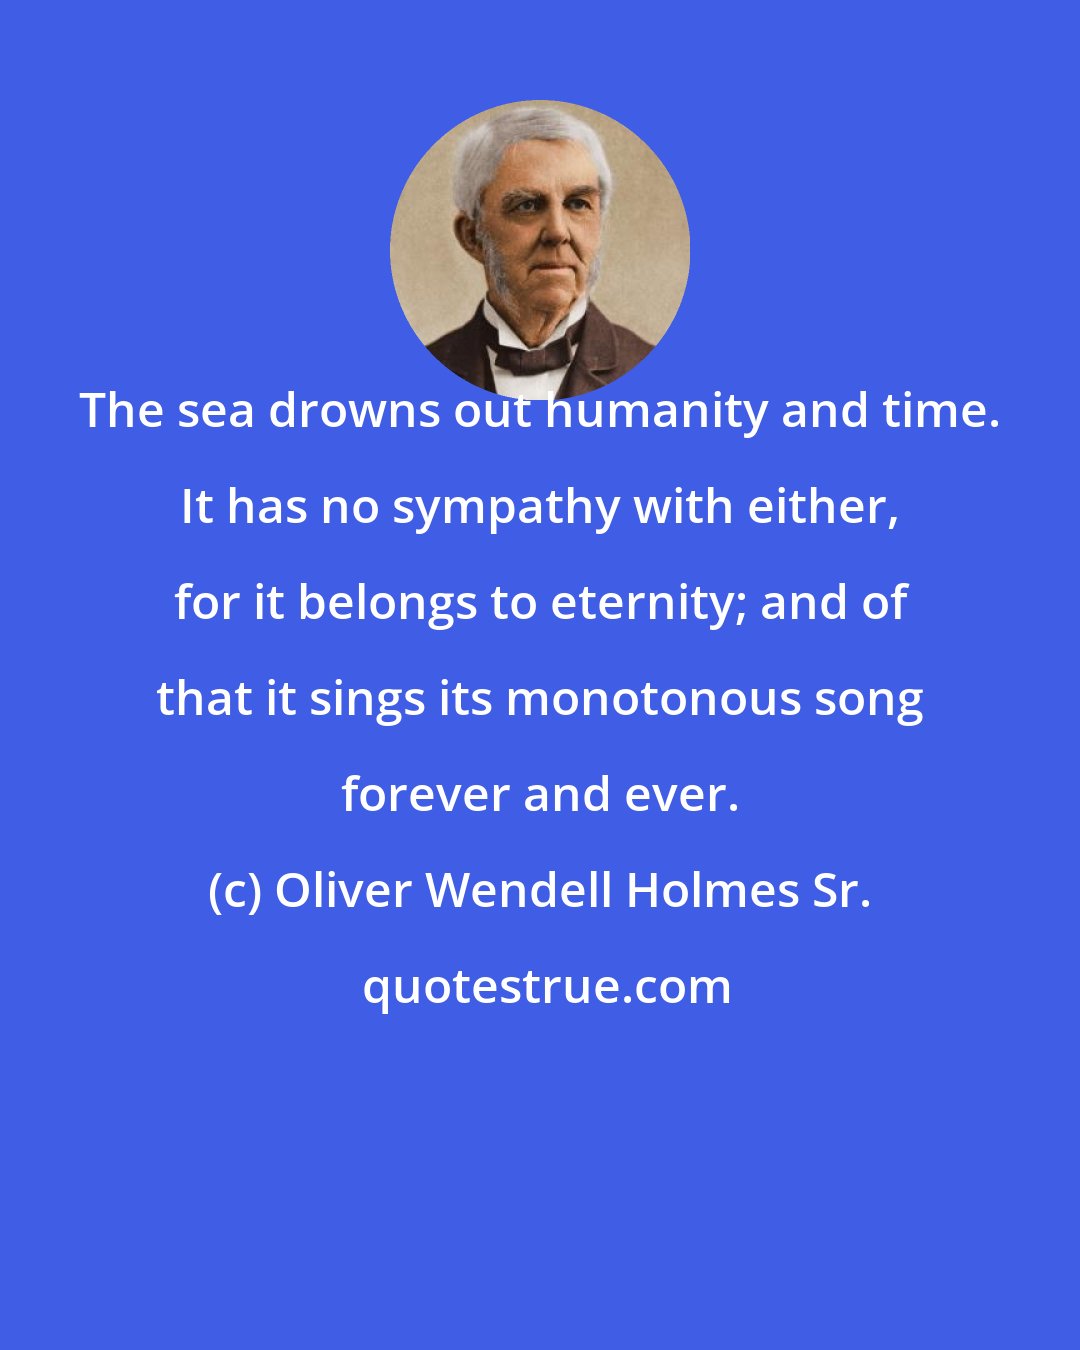 Oliver Wendell Holmes Sr.: The sea drowns out humanity and time. It has no sympathy with either, for it belongs to eternity; and of that it sings its monotonous song forever and ever.